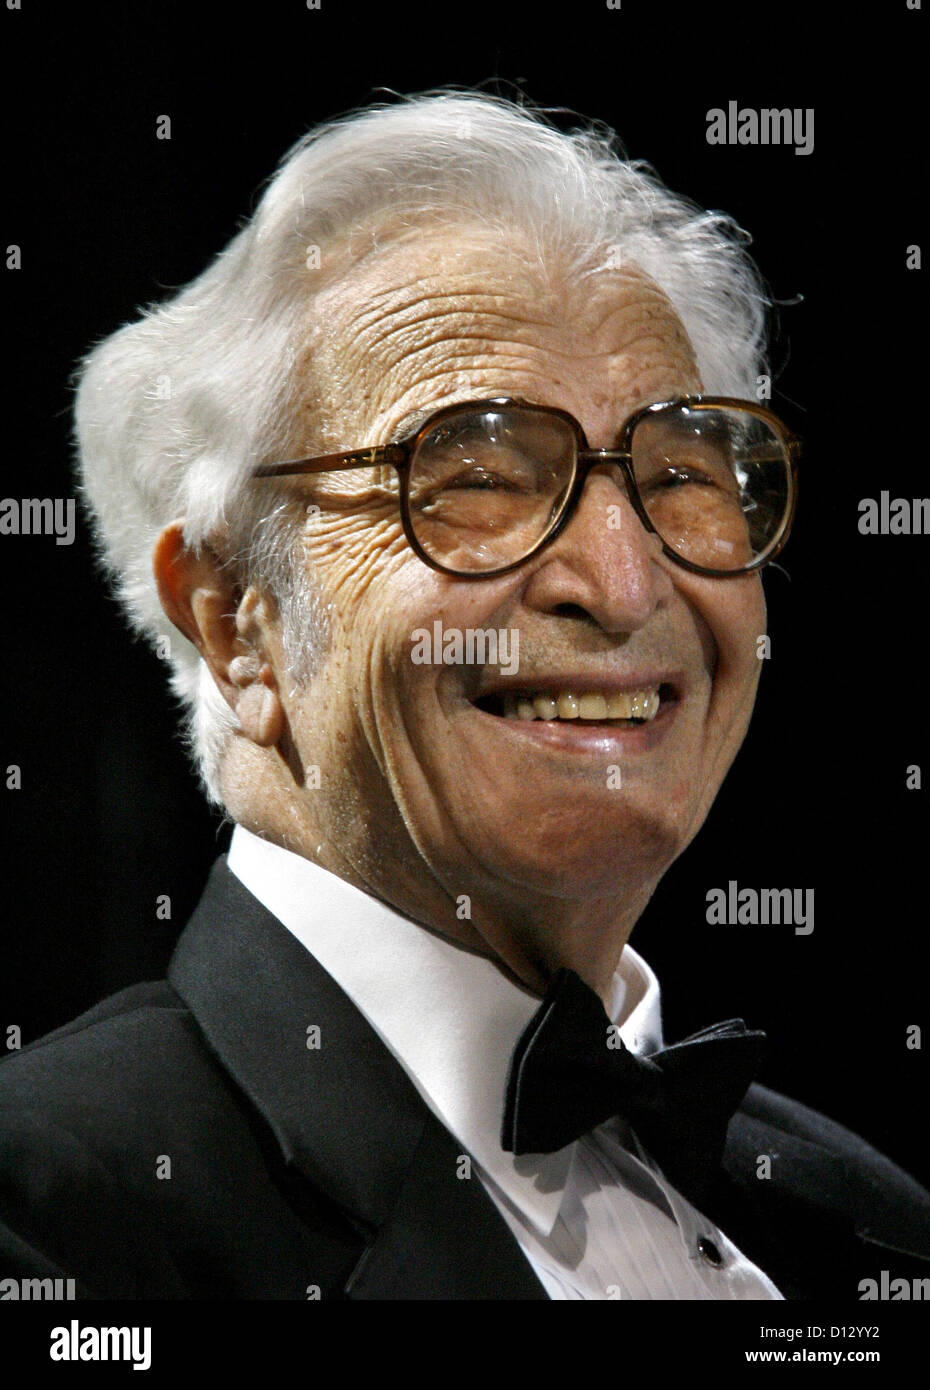 (dpa) - US American jazz pianist Dave Brubeck smiles during his concert at the 'Schauspielhaus' theatre in Nuremberg, Germany, Wednesday 16 November 2005. Brubeck performed together with his 'Dave Brubeck Quartet' in the course of events celebrating the 60th anniversary of the trials of war criminals in Nuremberg. Photo: Daniel Karmann Stock Photo